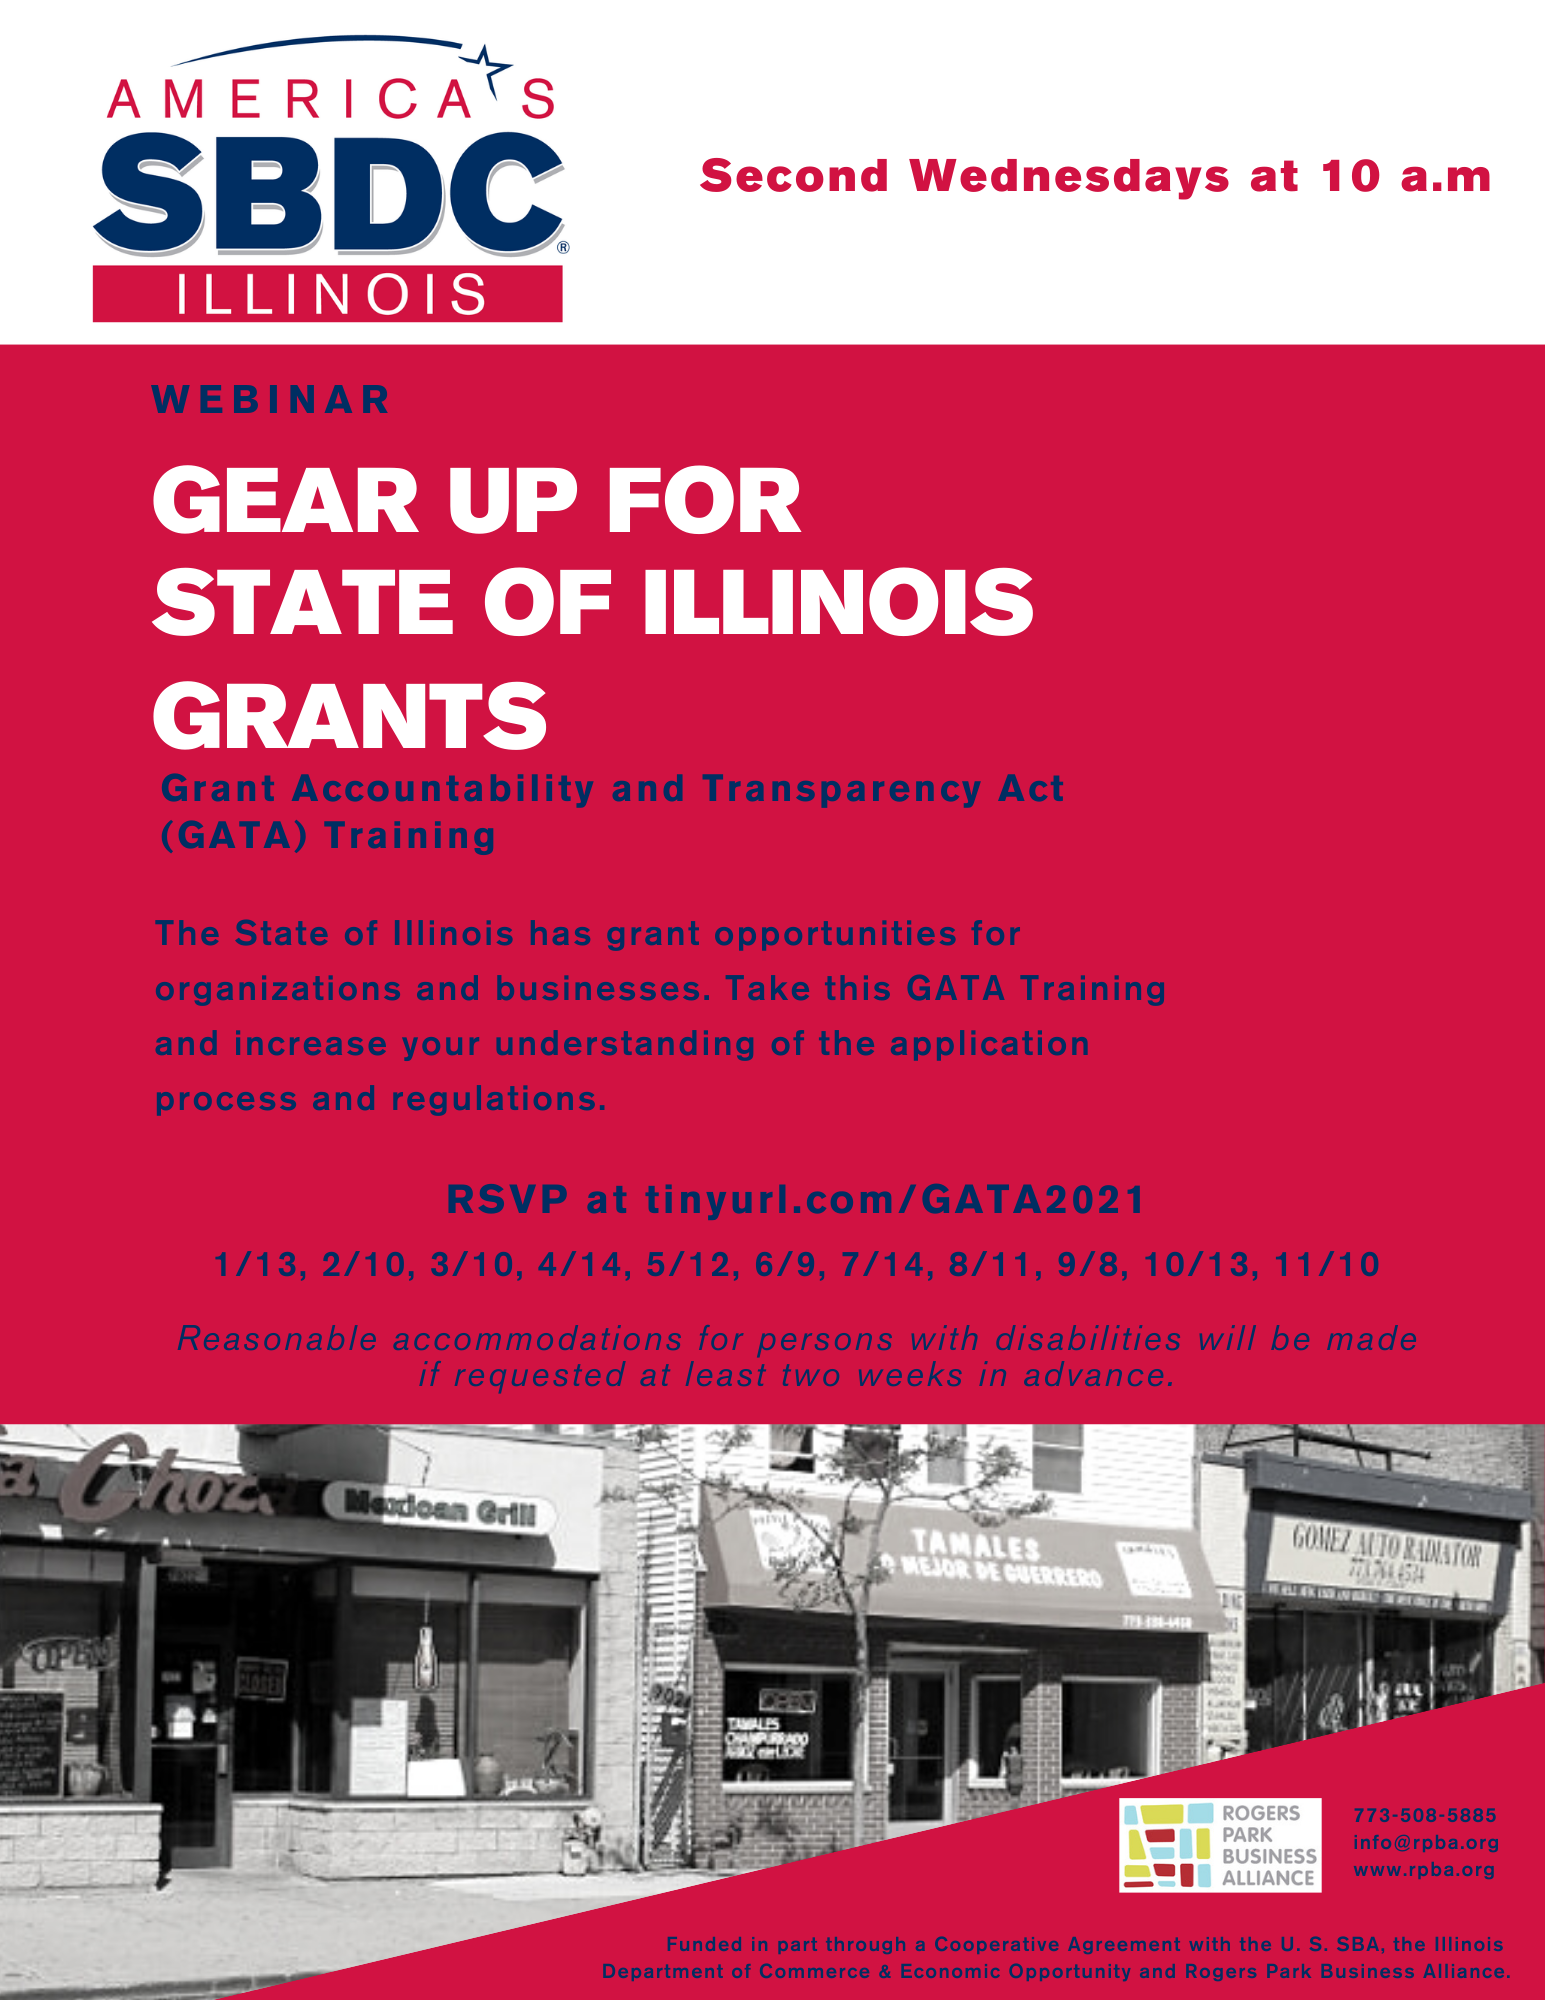 Gear Up for State of Illinois Grants (GATA), rogers-park-business-alliance